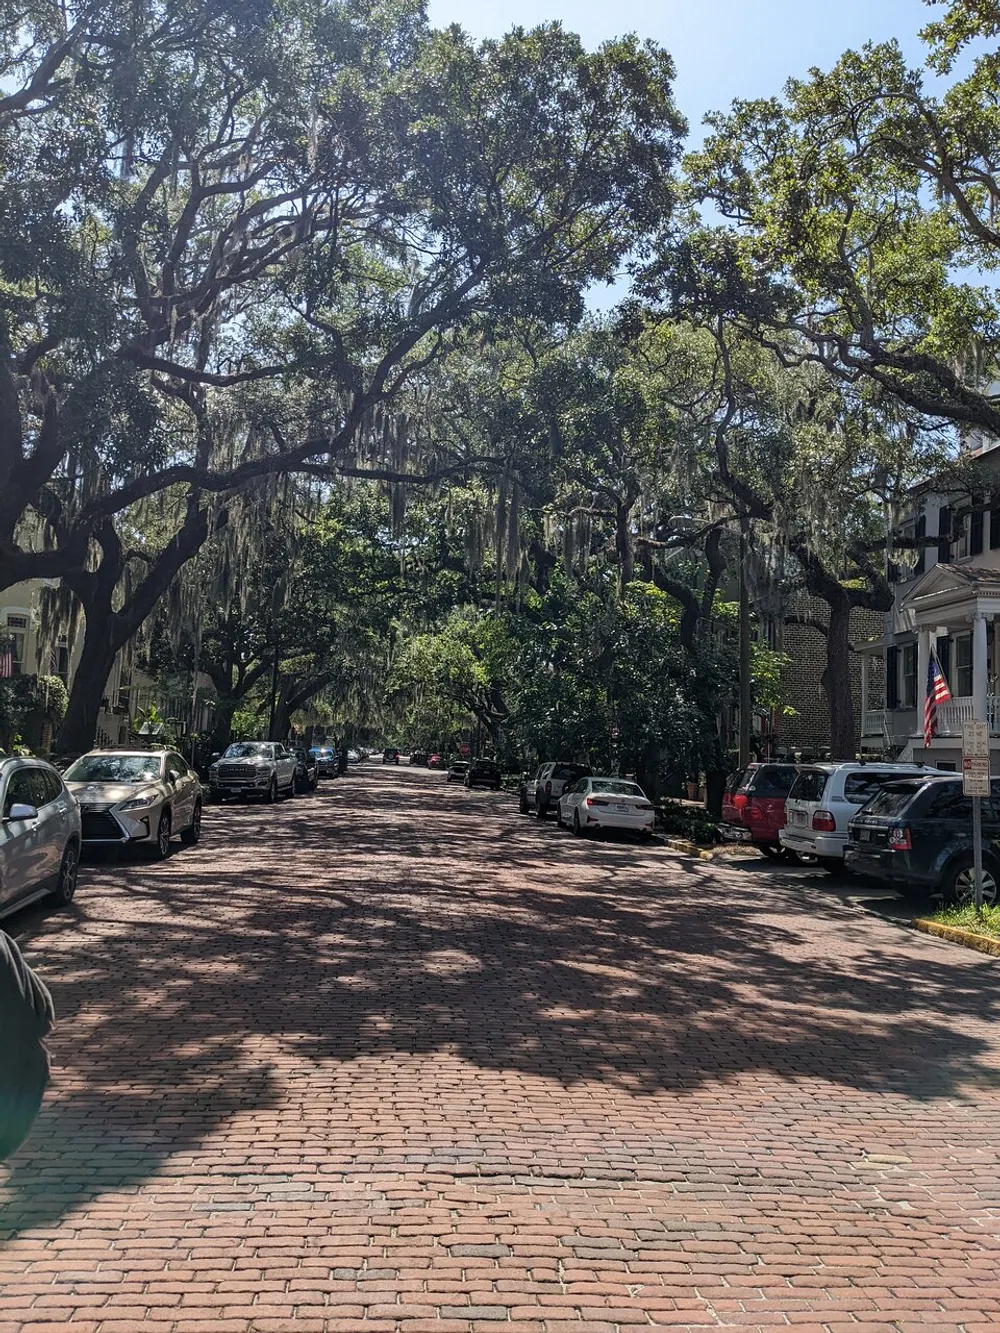 A sun-dappled brick-paved street is lined with parked cars and shaded by large sprawling trees draped in Spanish moss evoking the charm of a historic neighborhood